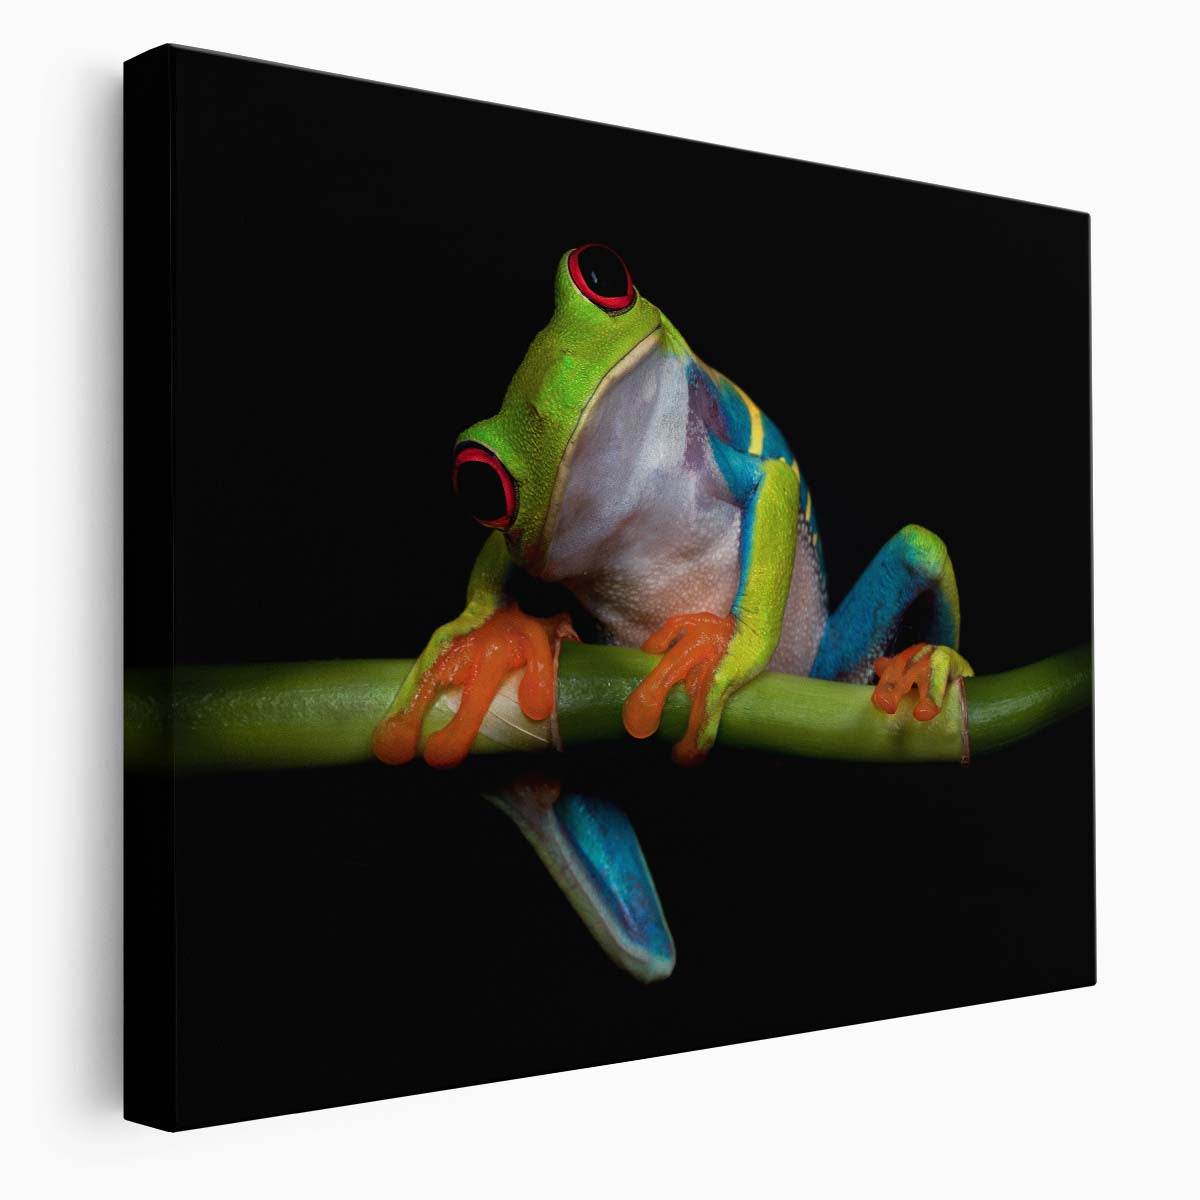 Red-Eyed Tree Frog Nocturnal Amphibian Macro Photography Wall Art